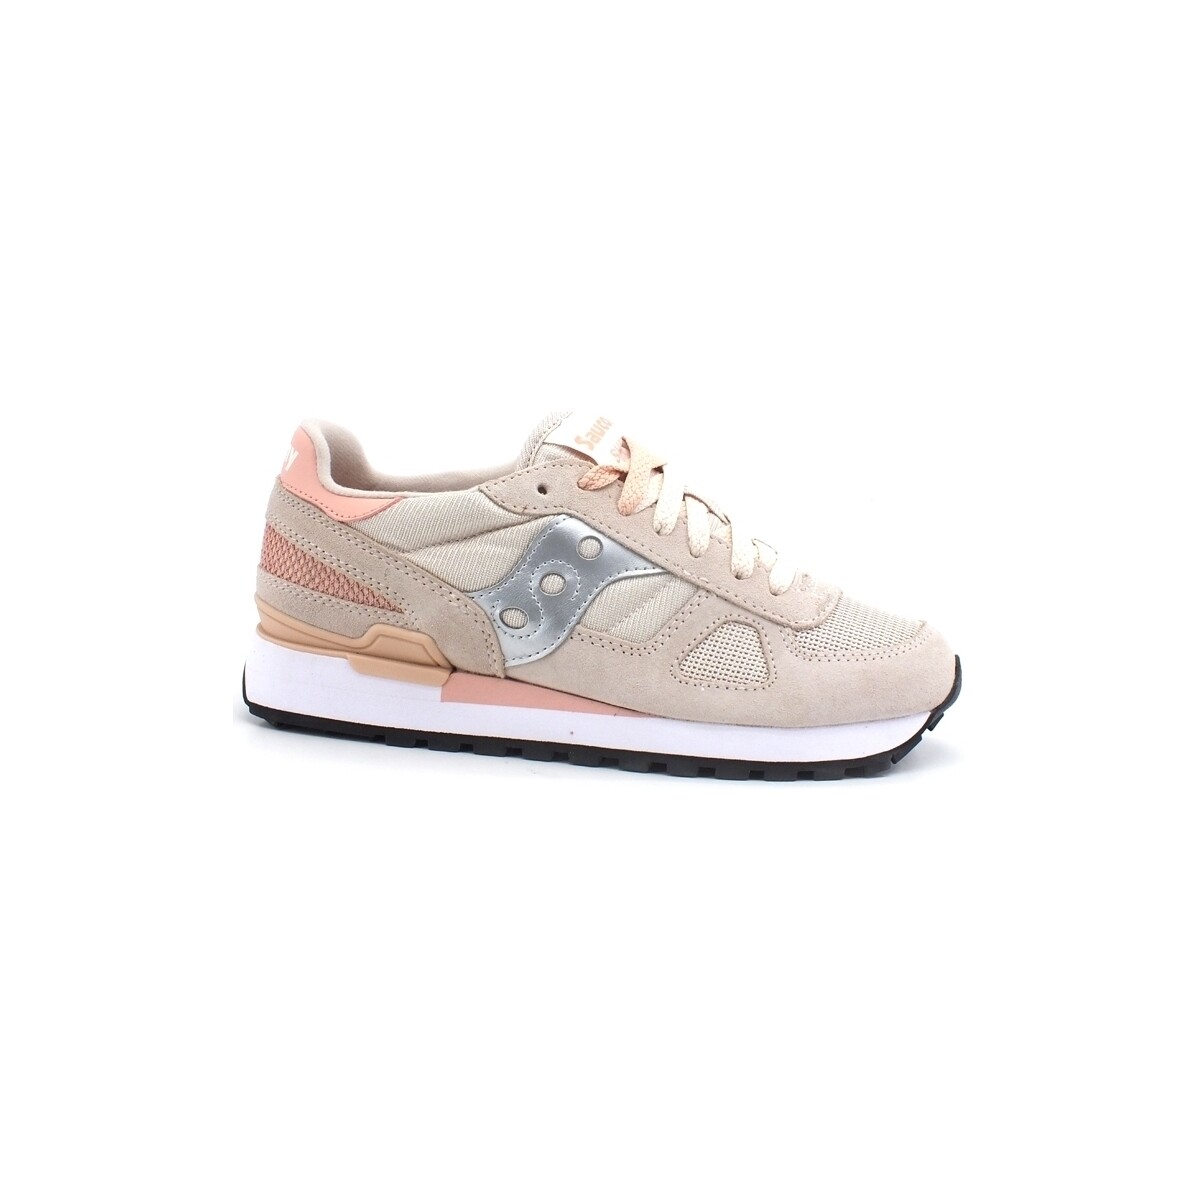 Chaussures Femme Bottes pink Saucony Shadow Original W Sneaker Tan Peach S1108-802 Rose